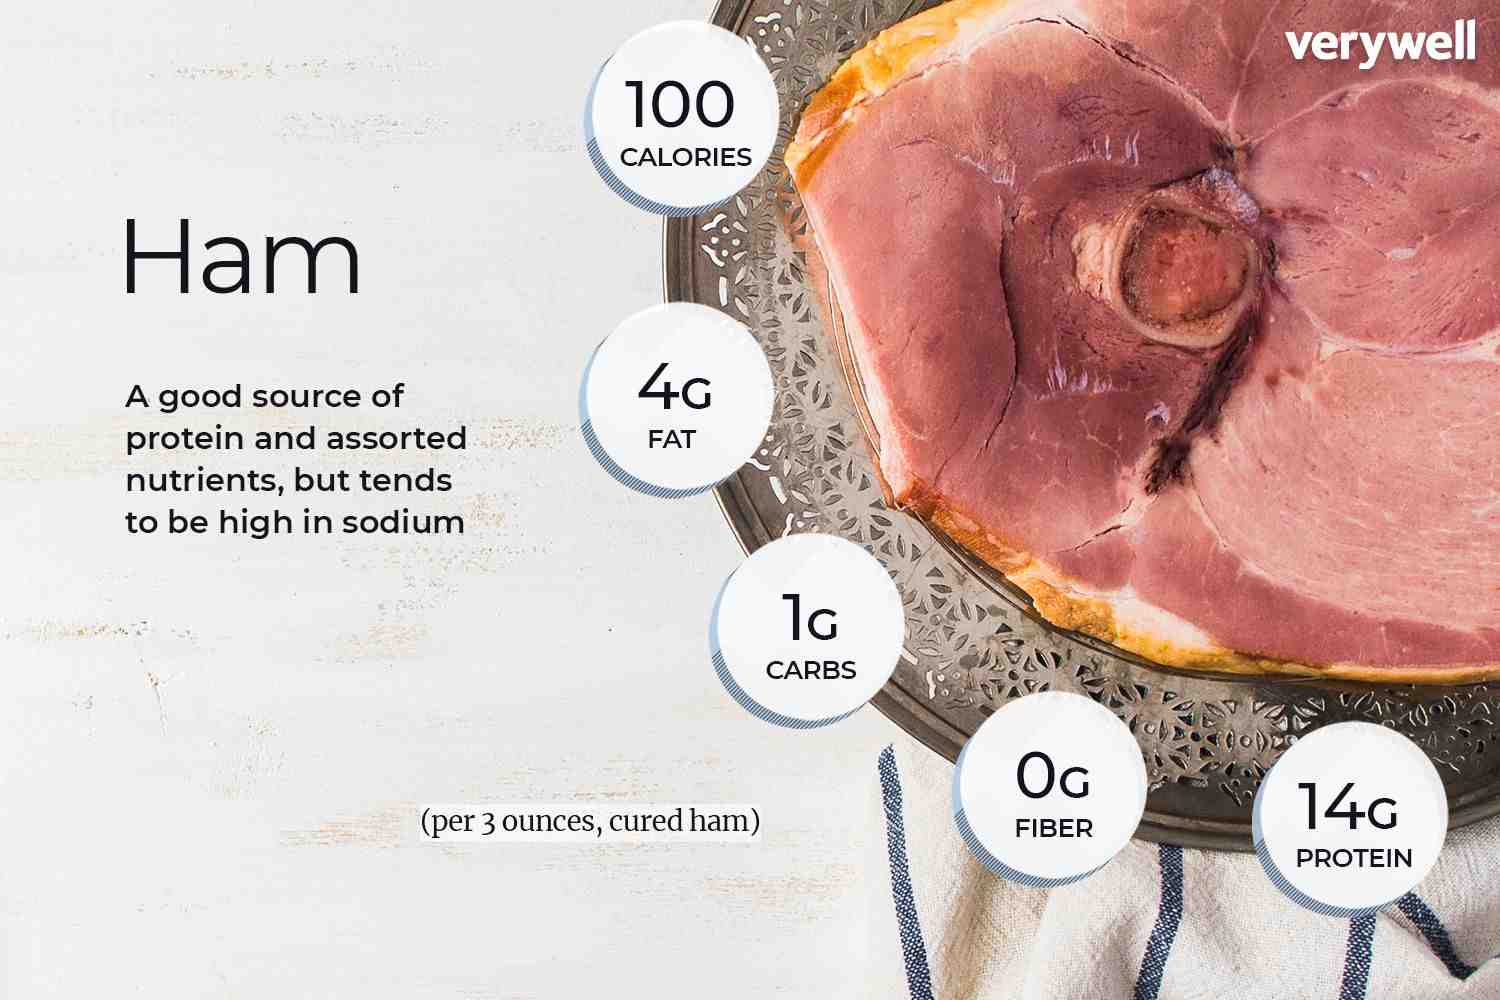 How many slices of ham is a serving?